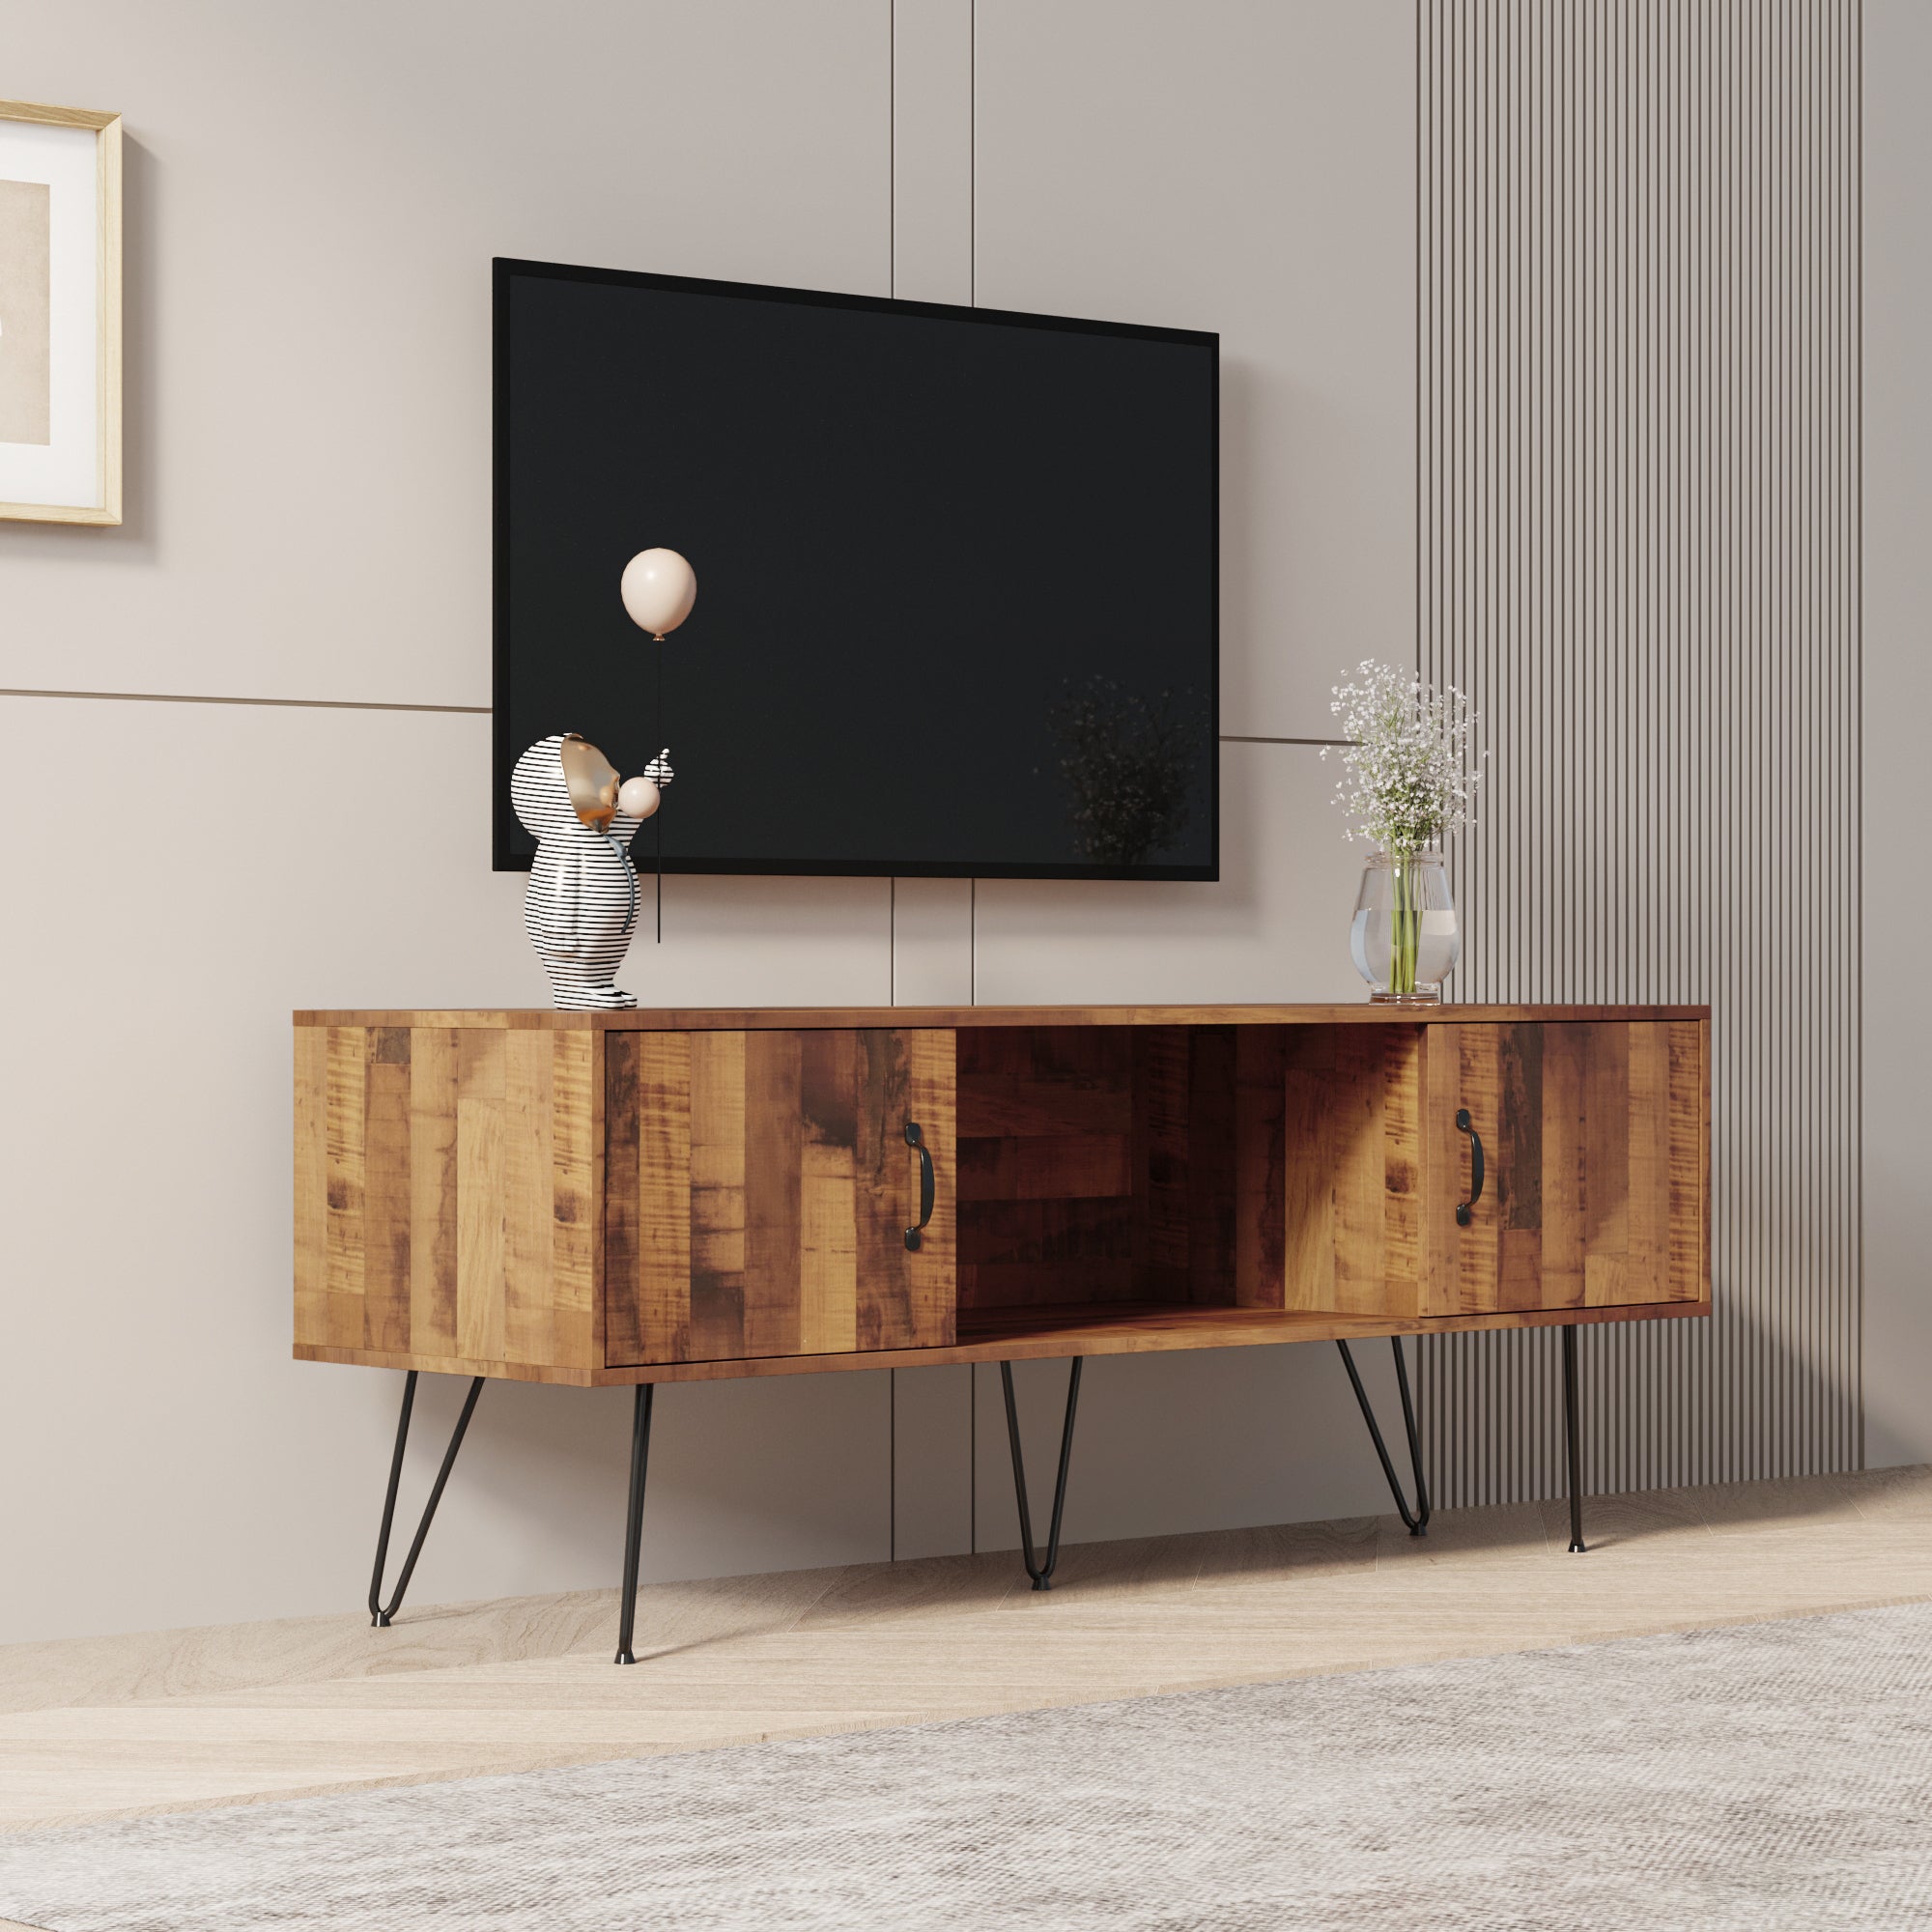 59" Rustic Brown TV Stand with Black Metal Legs, for TV up to 65"